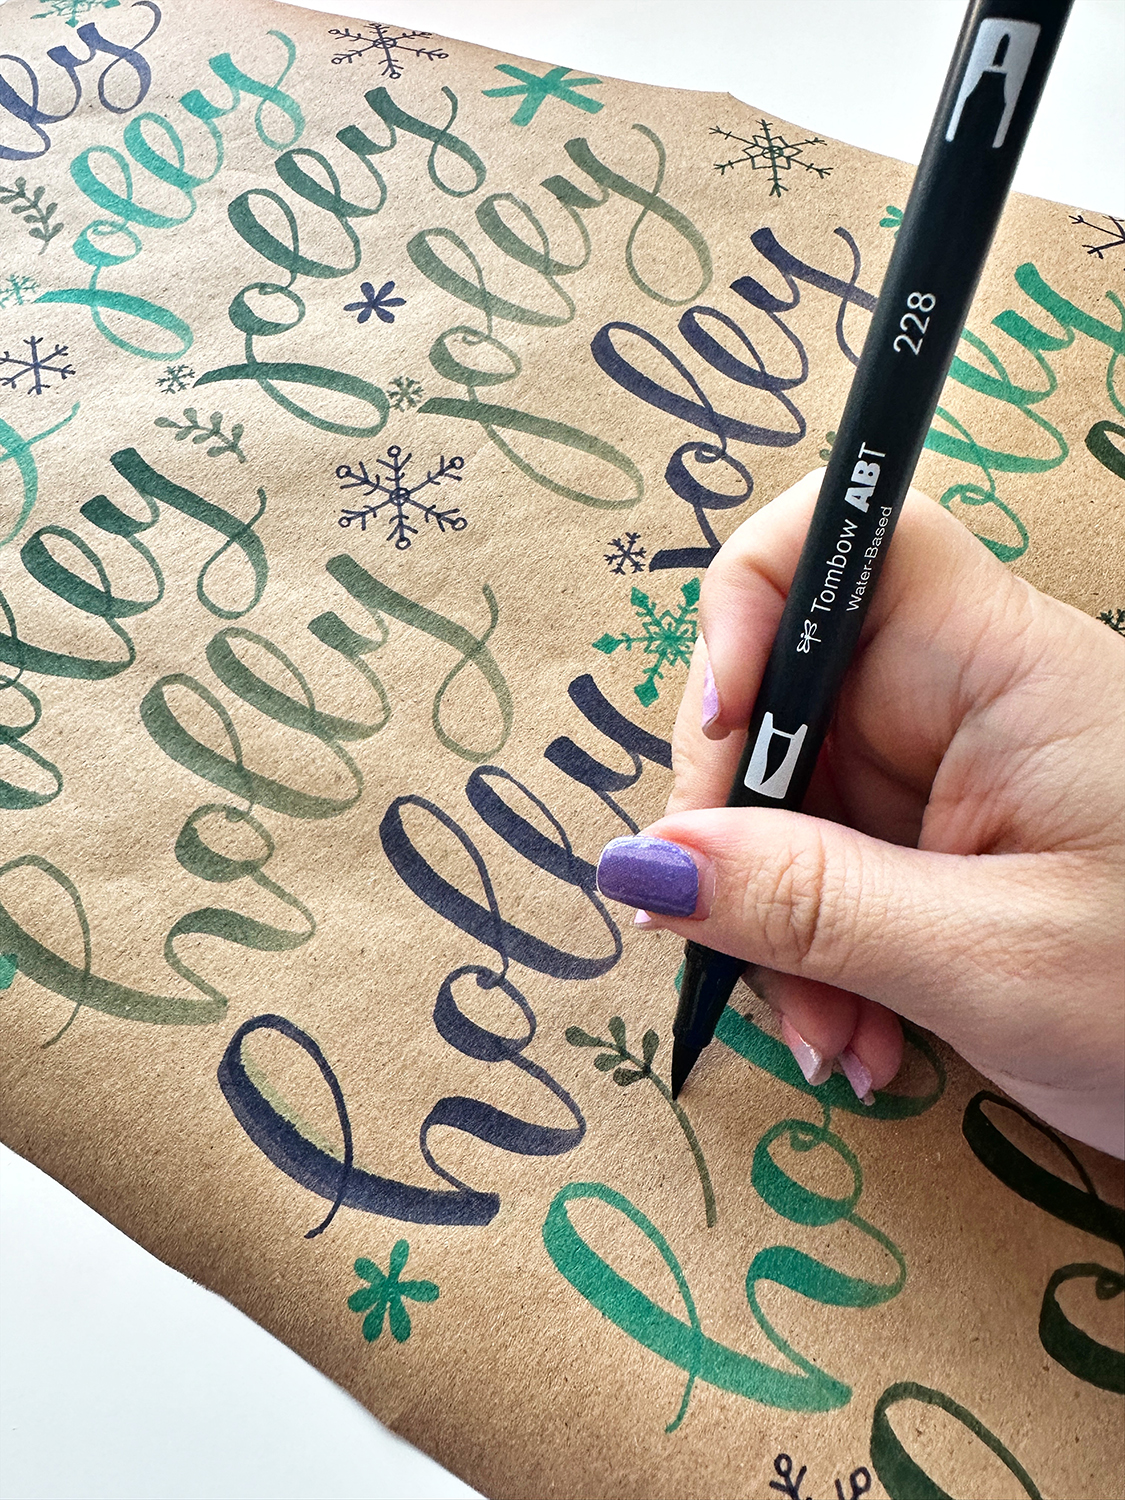 Make doodle dabs by placing the tip of the brush pen in a 45 degree angle and pressing down. You can use doodle dabs to create leaves and flowers. #tombow #giftwrapping